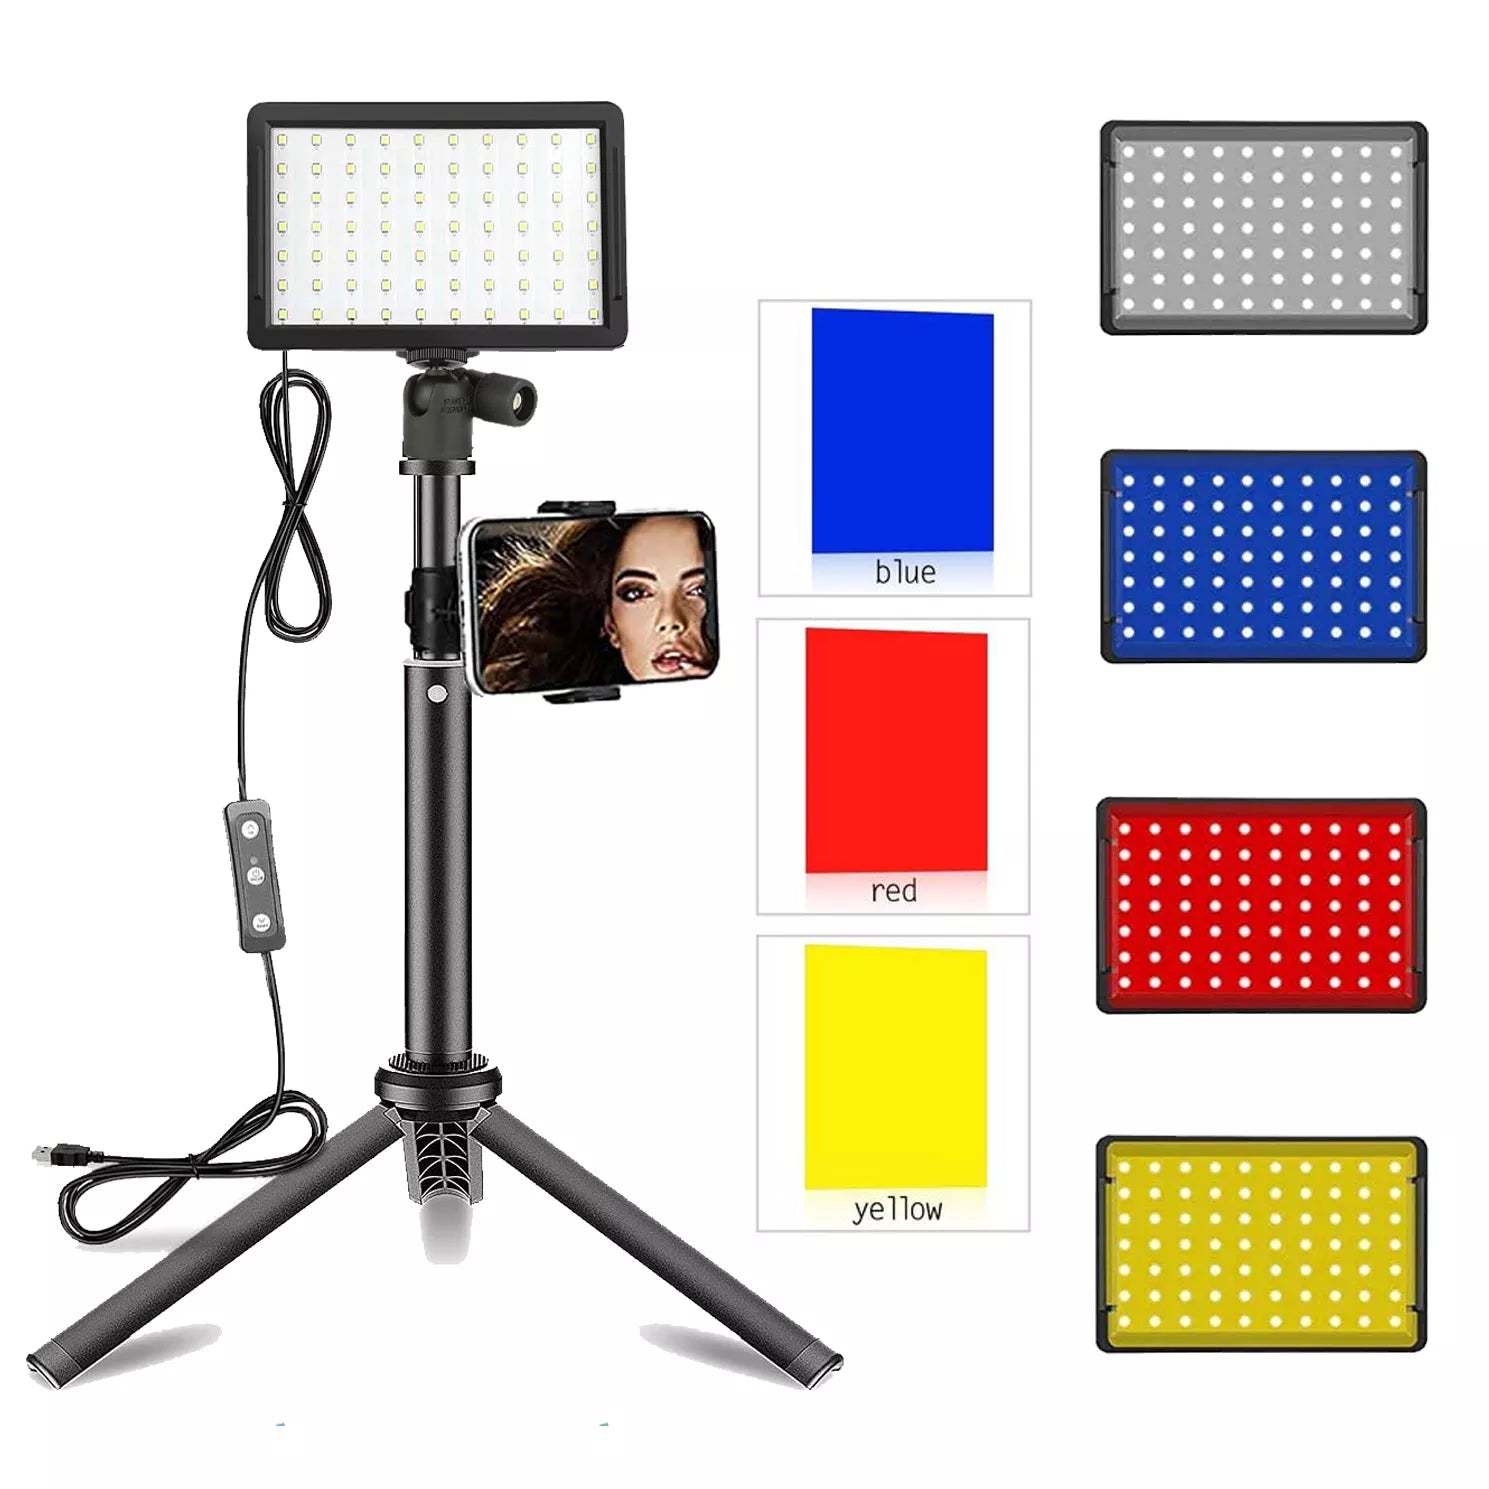 LED Panel Photography Light: RGB Filters for Creative Content Glow  ourlum.com   